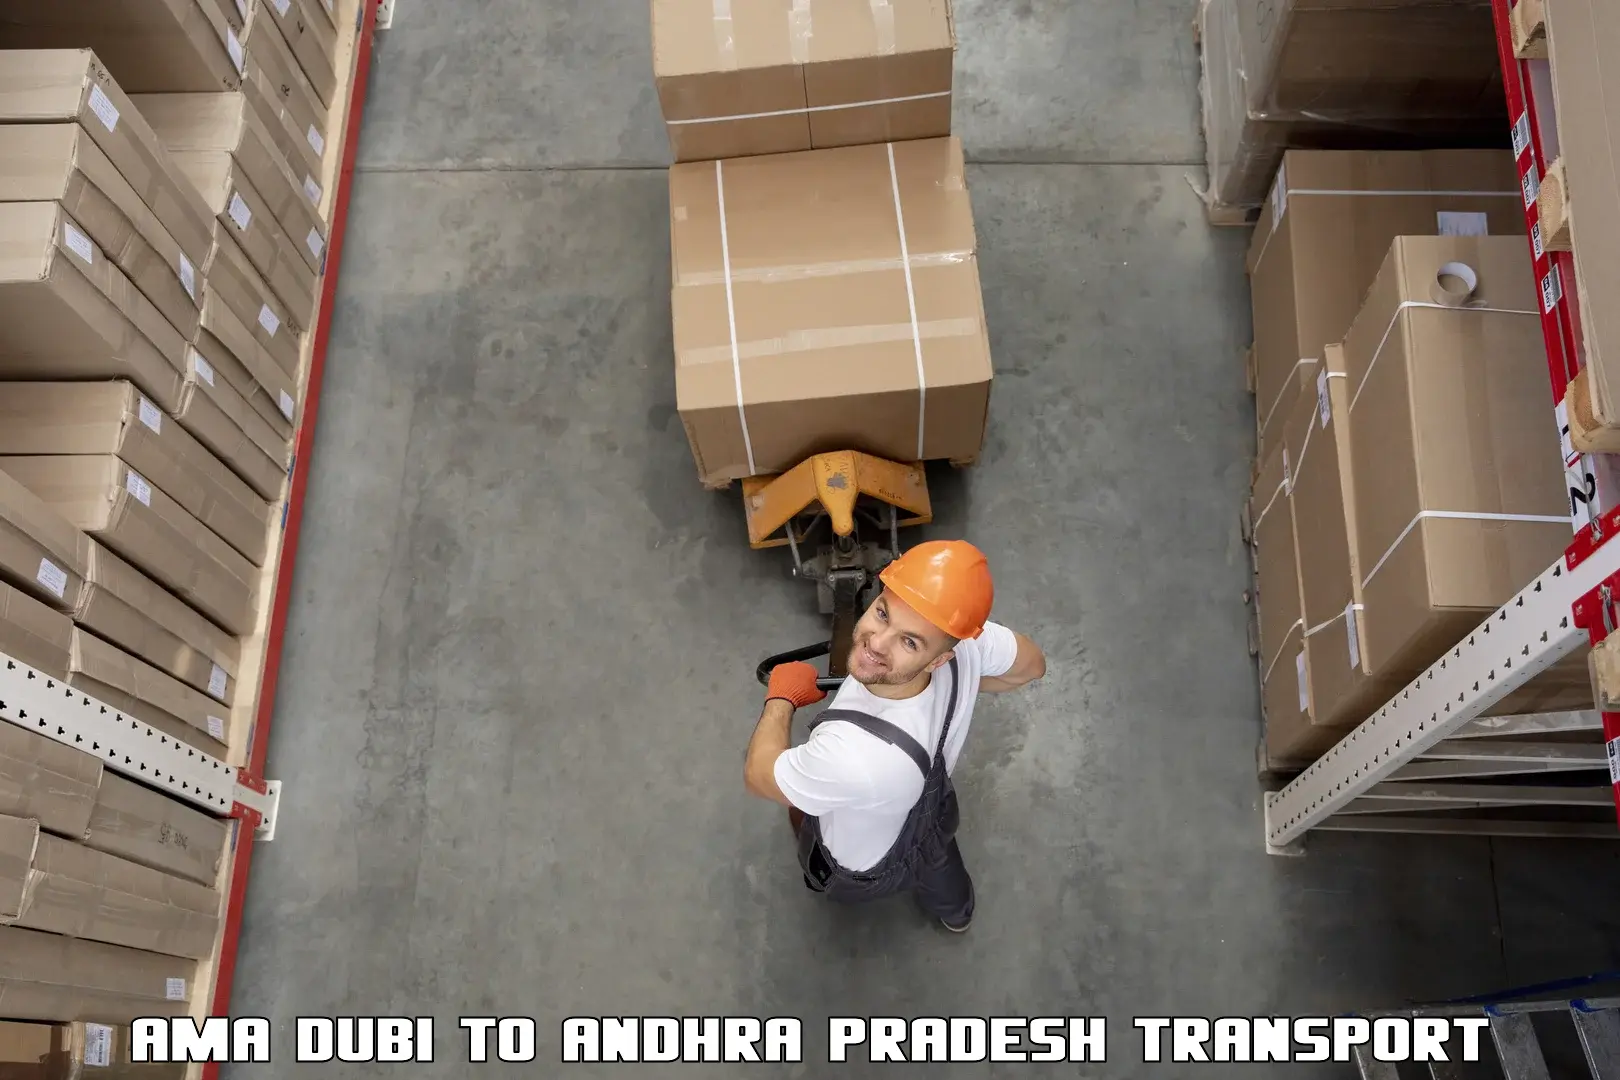 Package delivery services Ama Dubi to Tripuranthakam